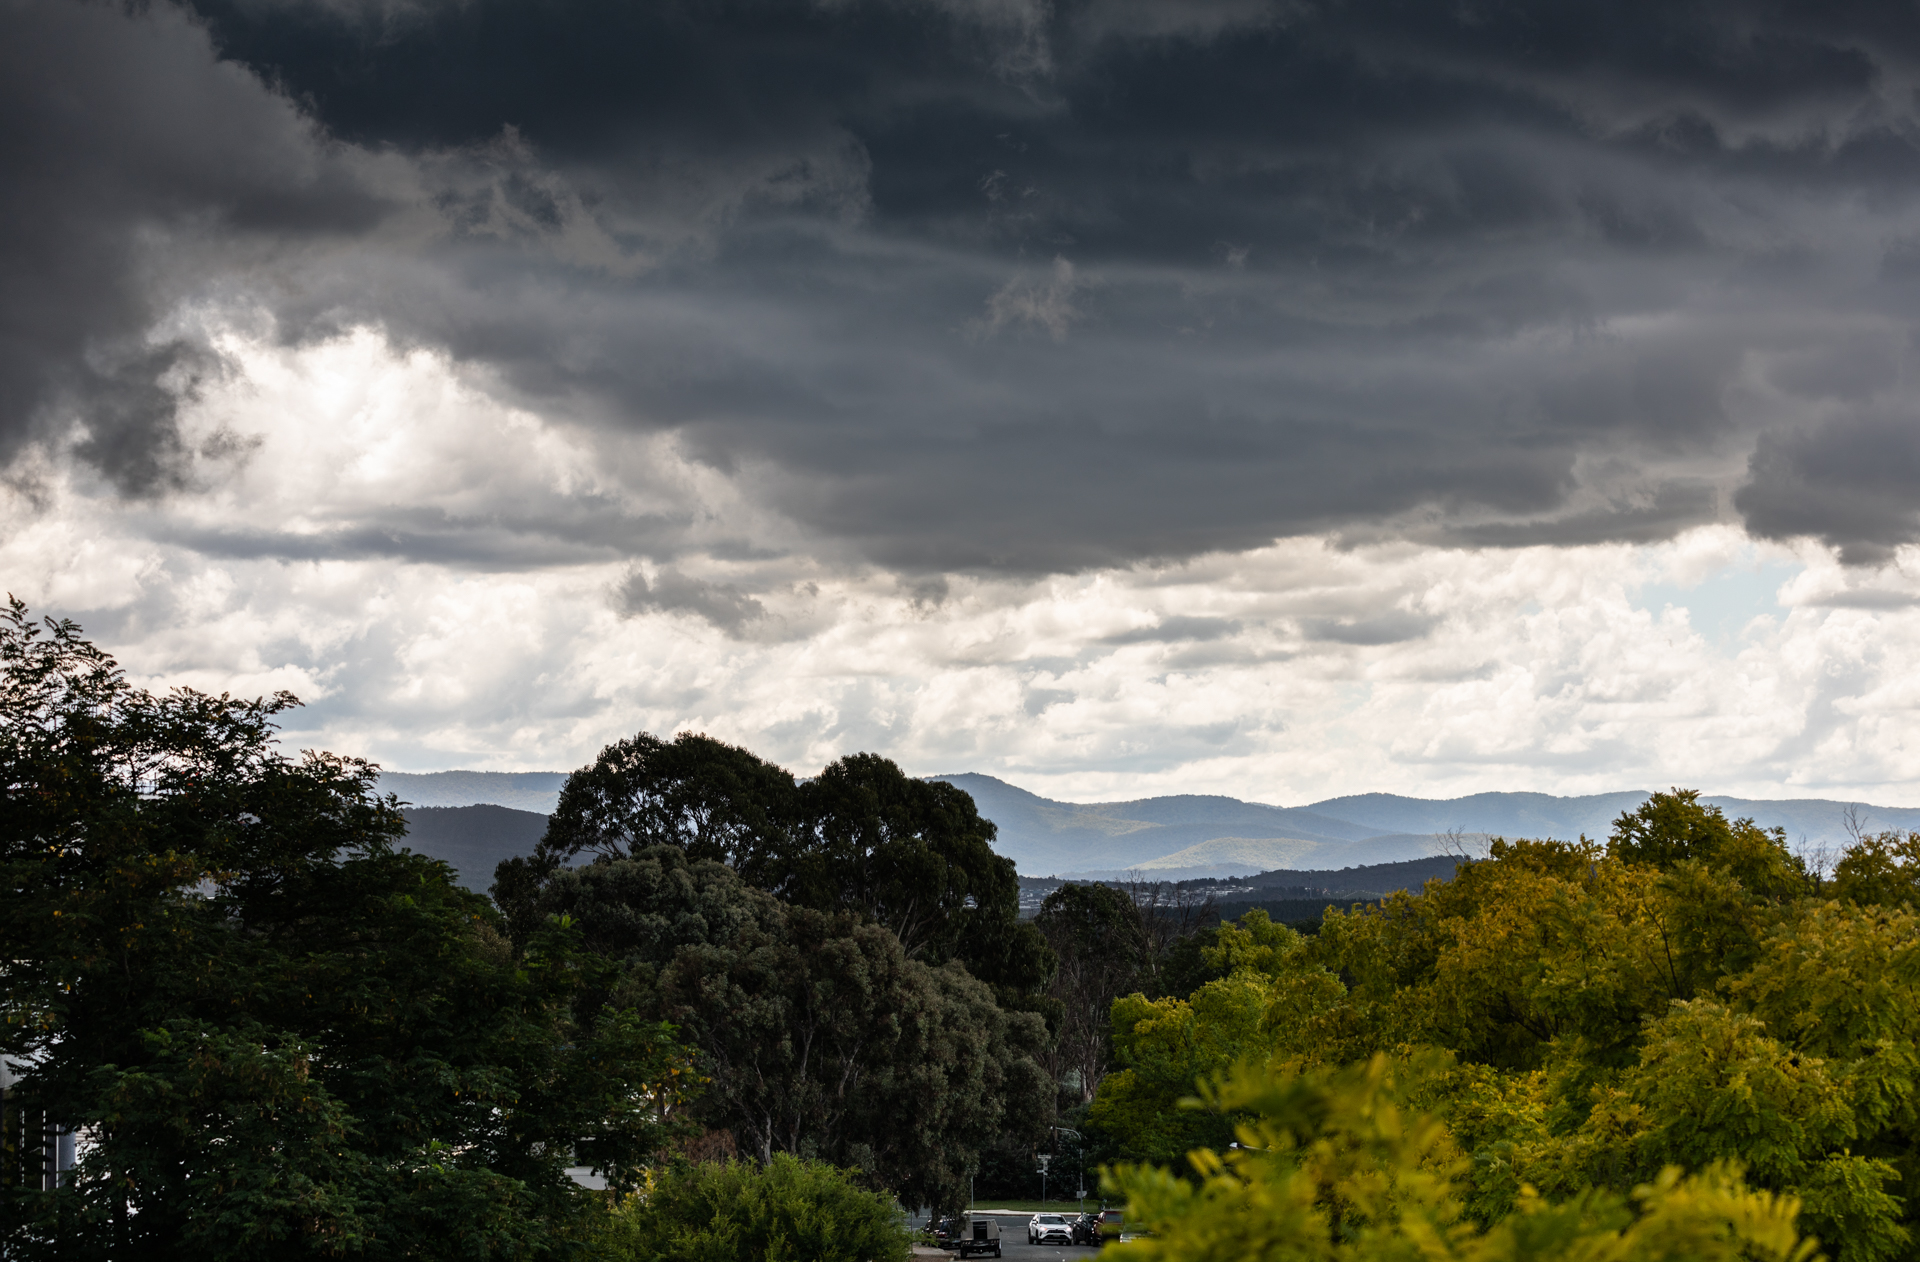 Severe thunderstorm warning with damaging winds, large hailstones and heavy rainfall issued for Canberra